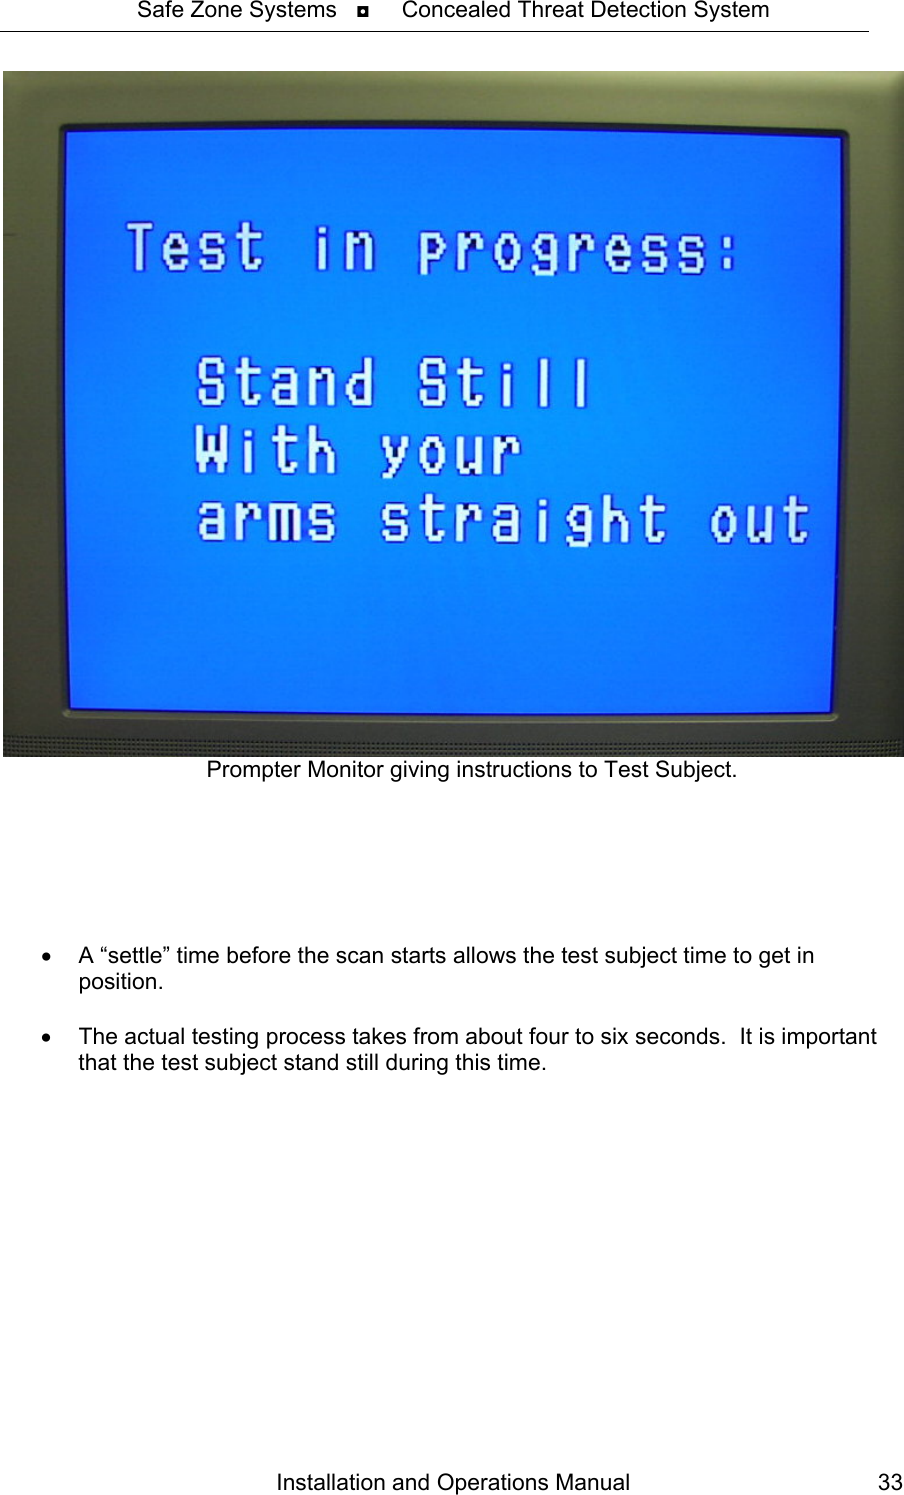 Safe Zone Systems   ◘     Concealed Threat Detection System  Installation and Operations Manual  33Prompter Monitor giving instructions to Test Subject.       •  A “settle” time before the scan starts allows the test subject time to get in position.  •  The actual testing process takes from about four to six seconds.  It is important that the test subject stand still during this time.  